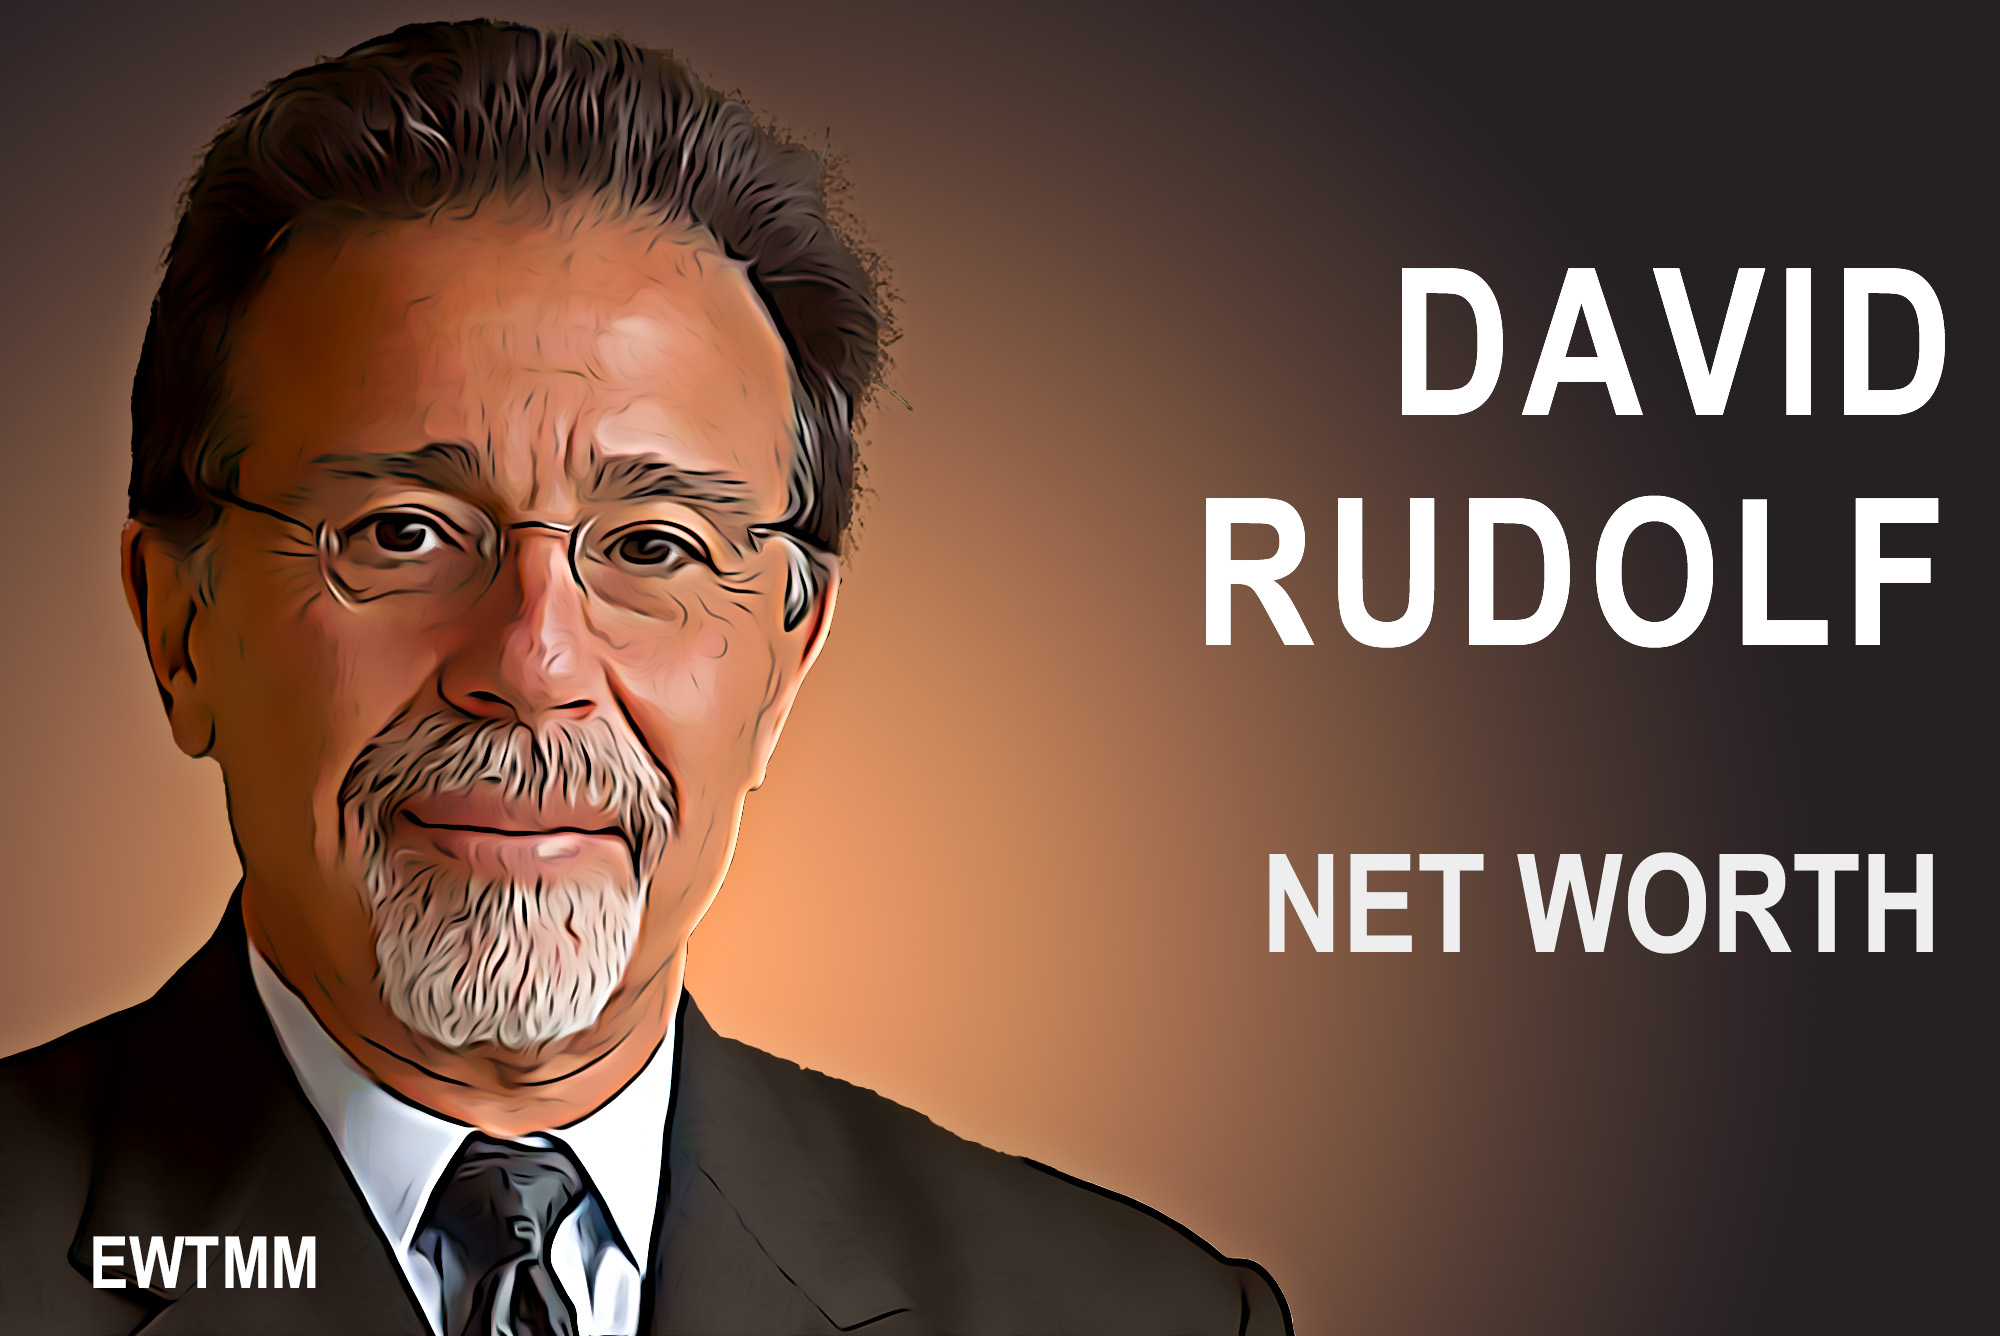 David Rudolf Net Worth, Earnings, Personal Life and More